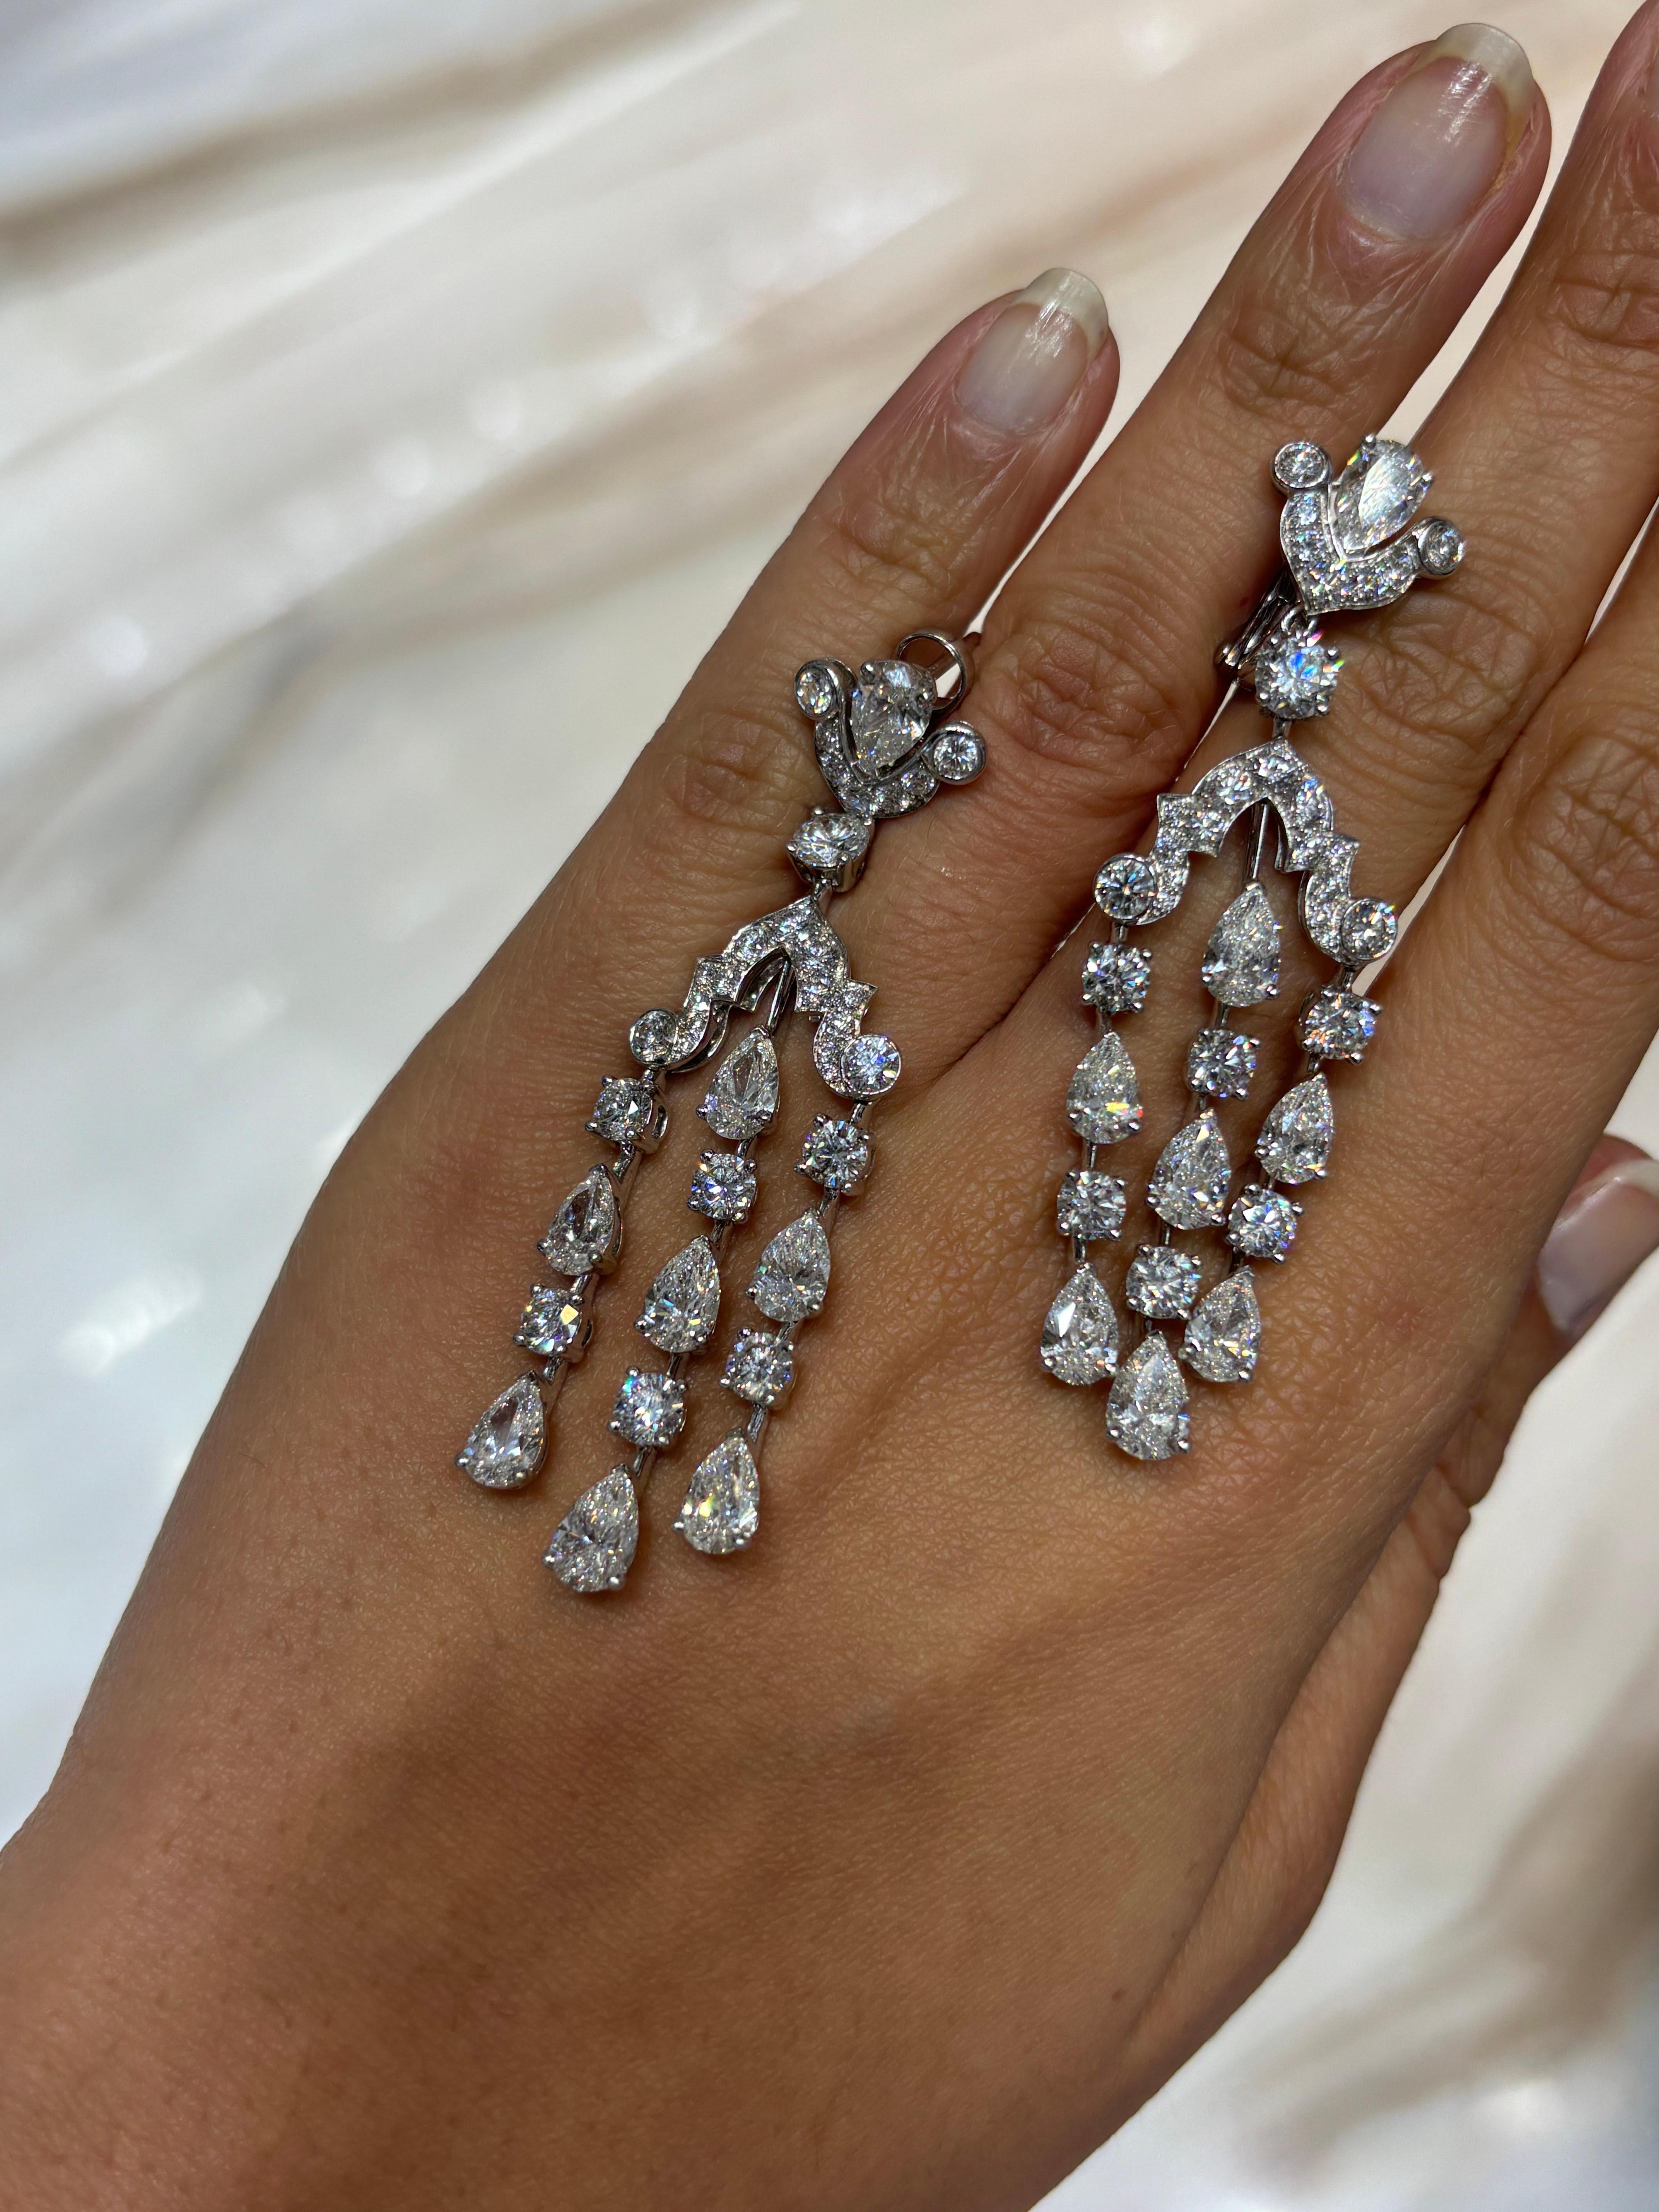 A stunning pair of original Graff signed chandelier earrings from with Sotheby’s auction papers, White Diamonds weighing approximately 15 carats, G-H color, VS quality. 
We provide free shipping, and accept returns. 
Please message us for more